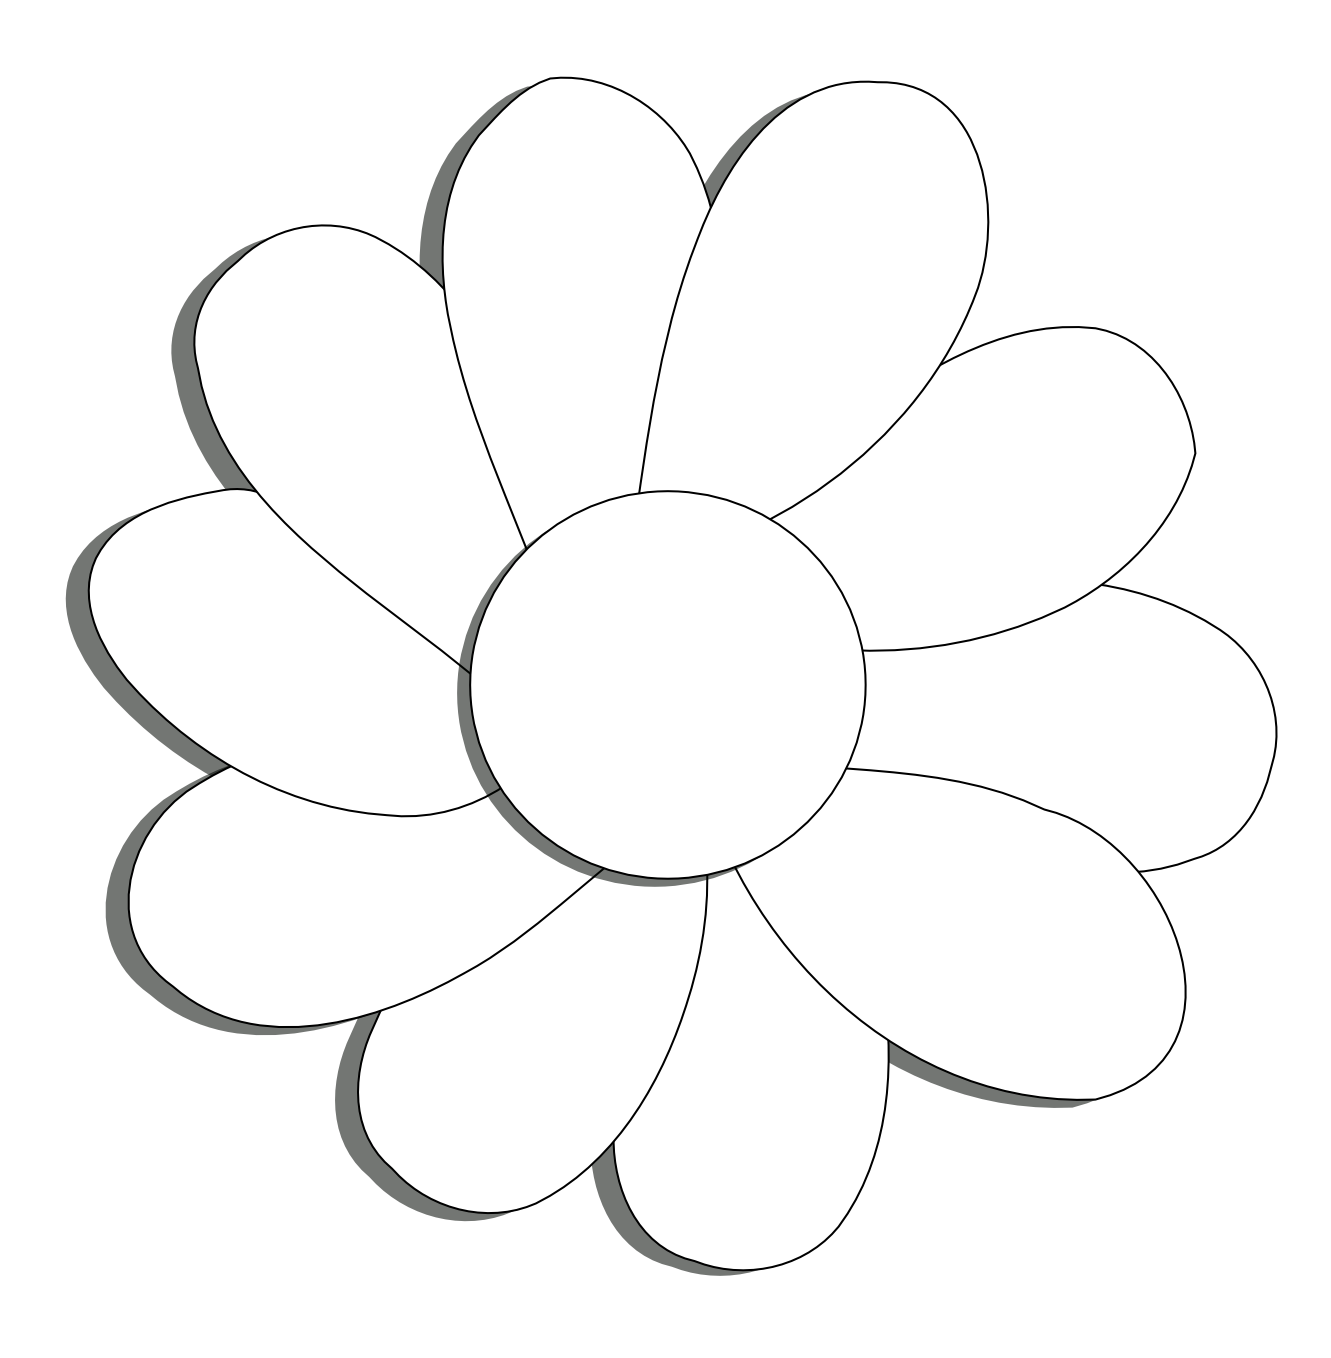 Flower Black And White PNG File